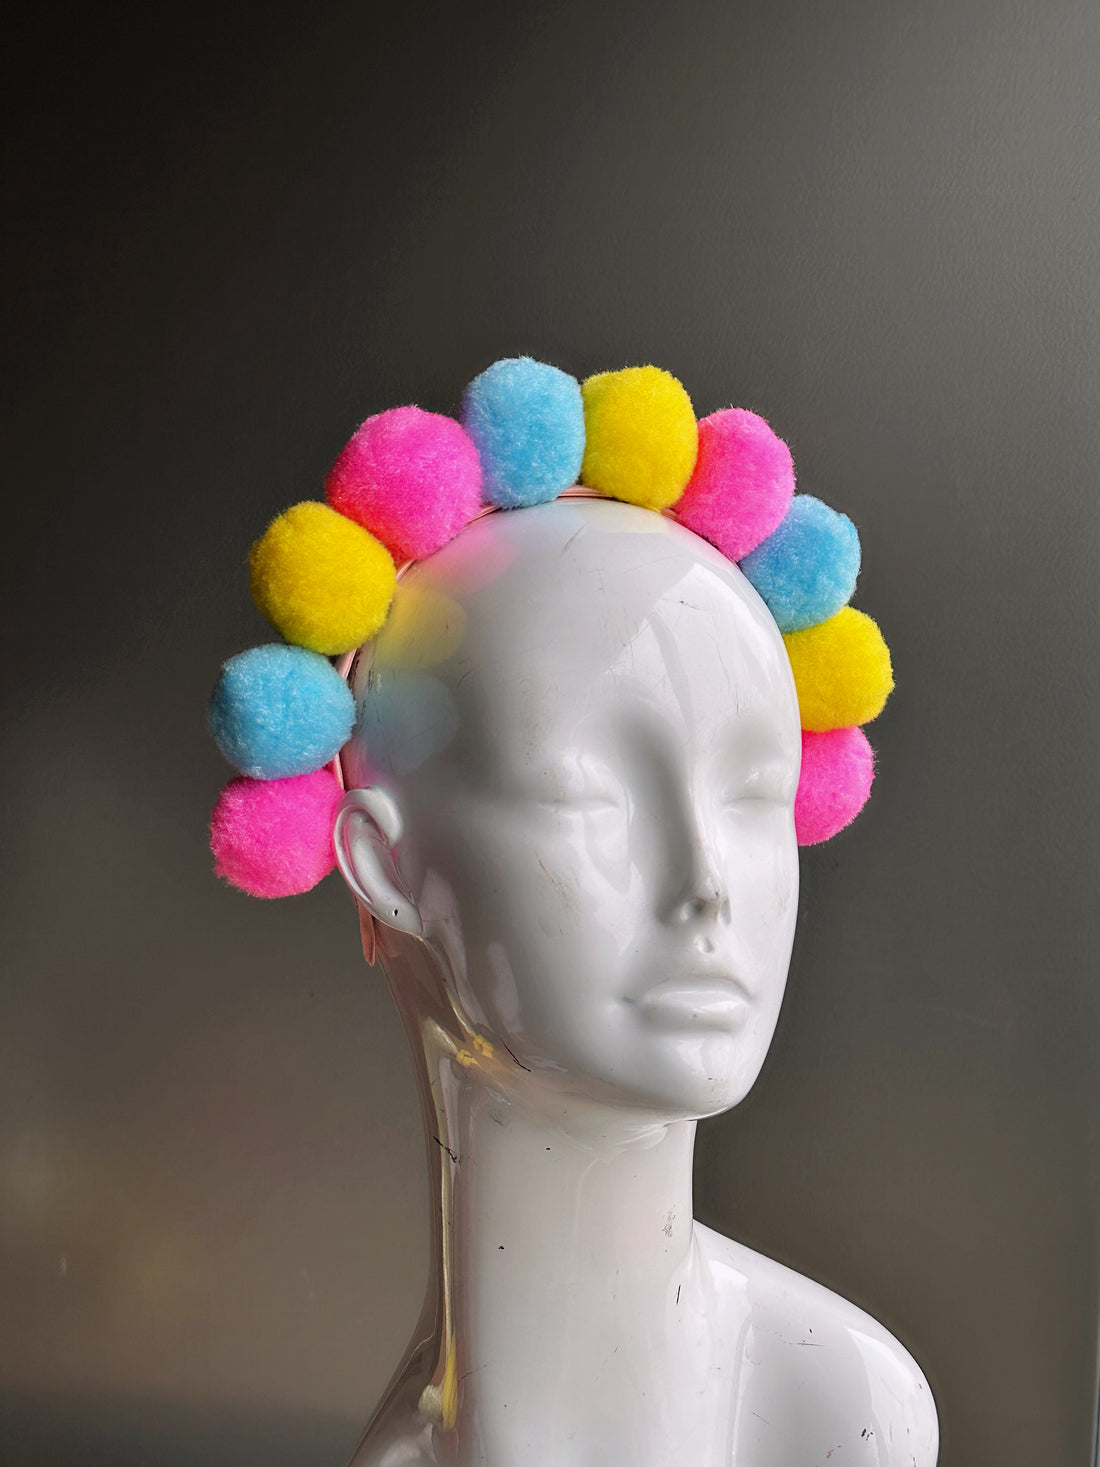 Fuzzy pompom balls in pink, blue, yellow on a pink headband